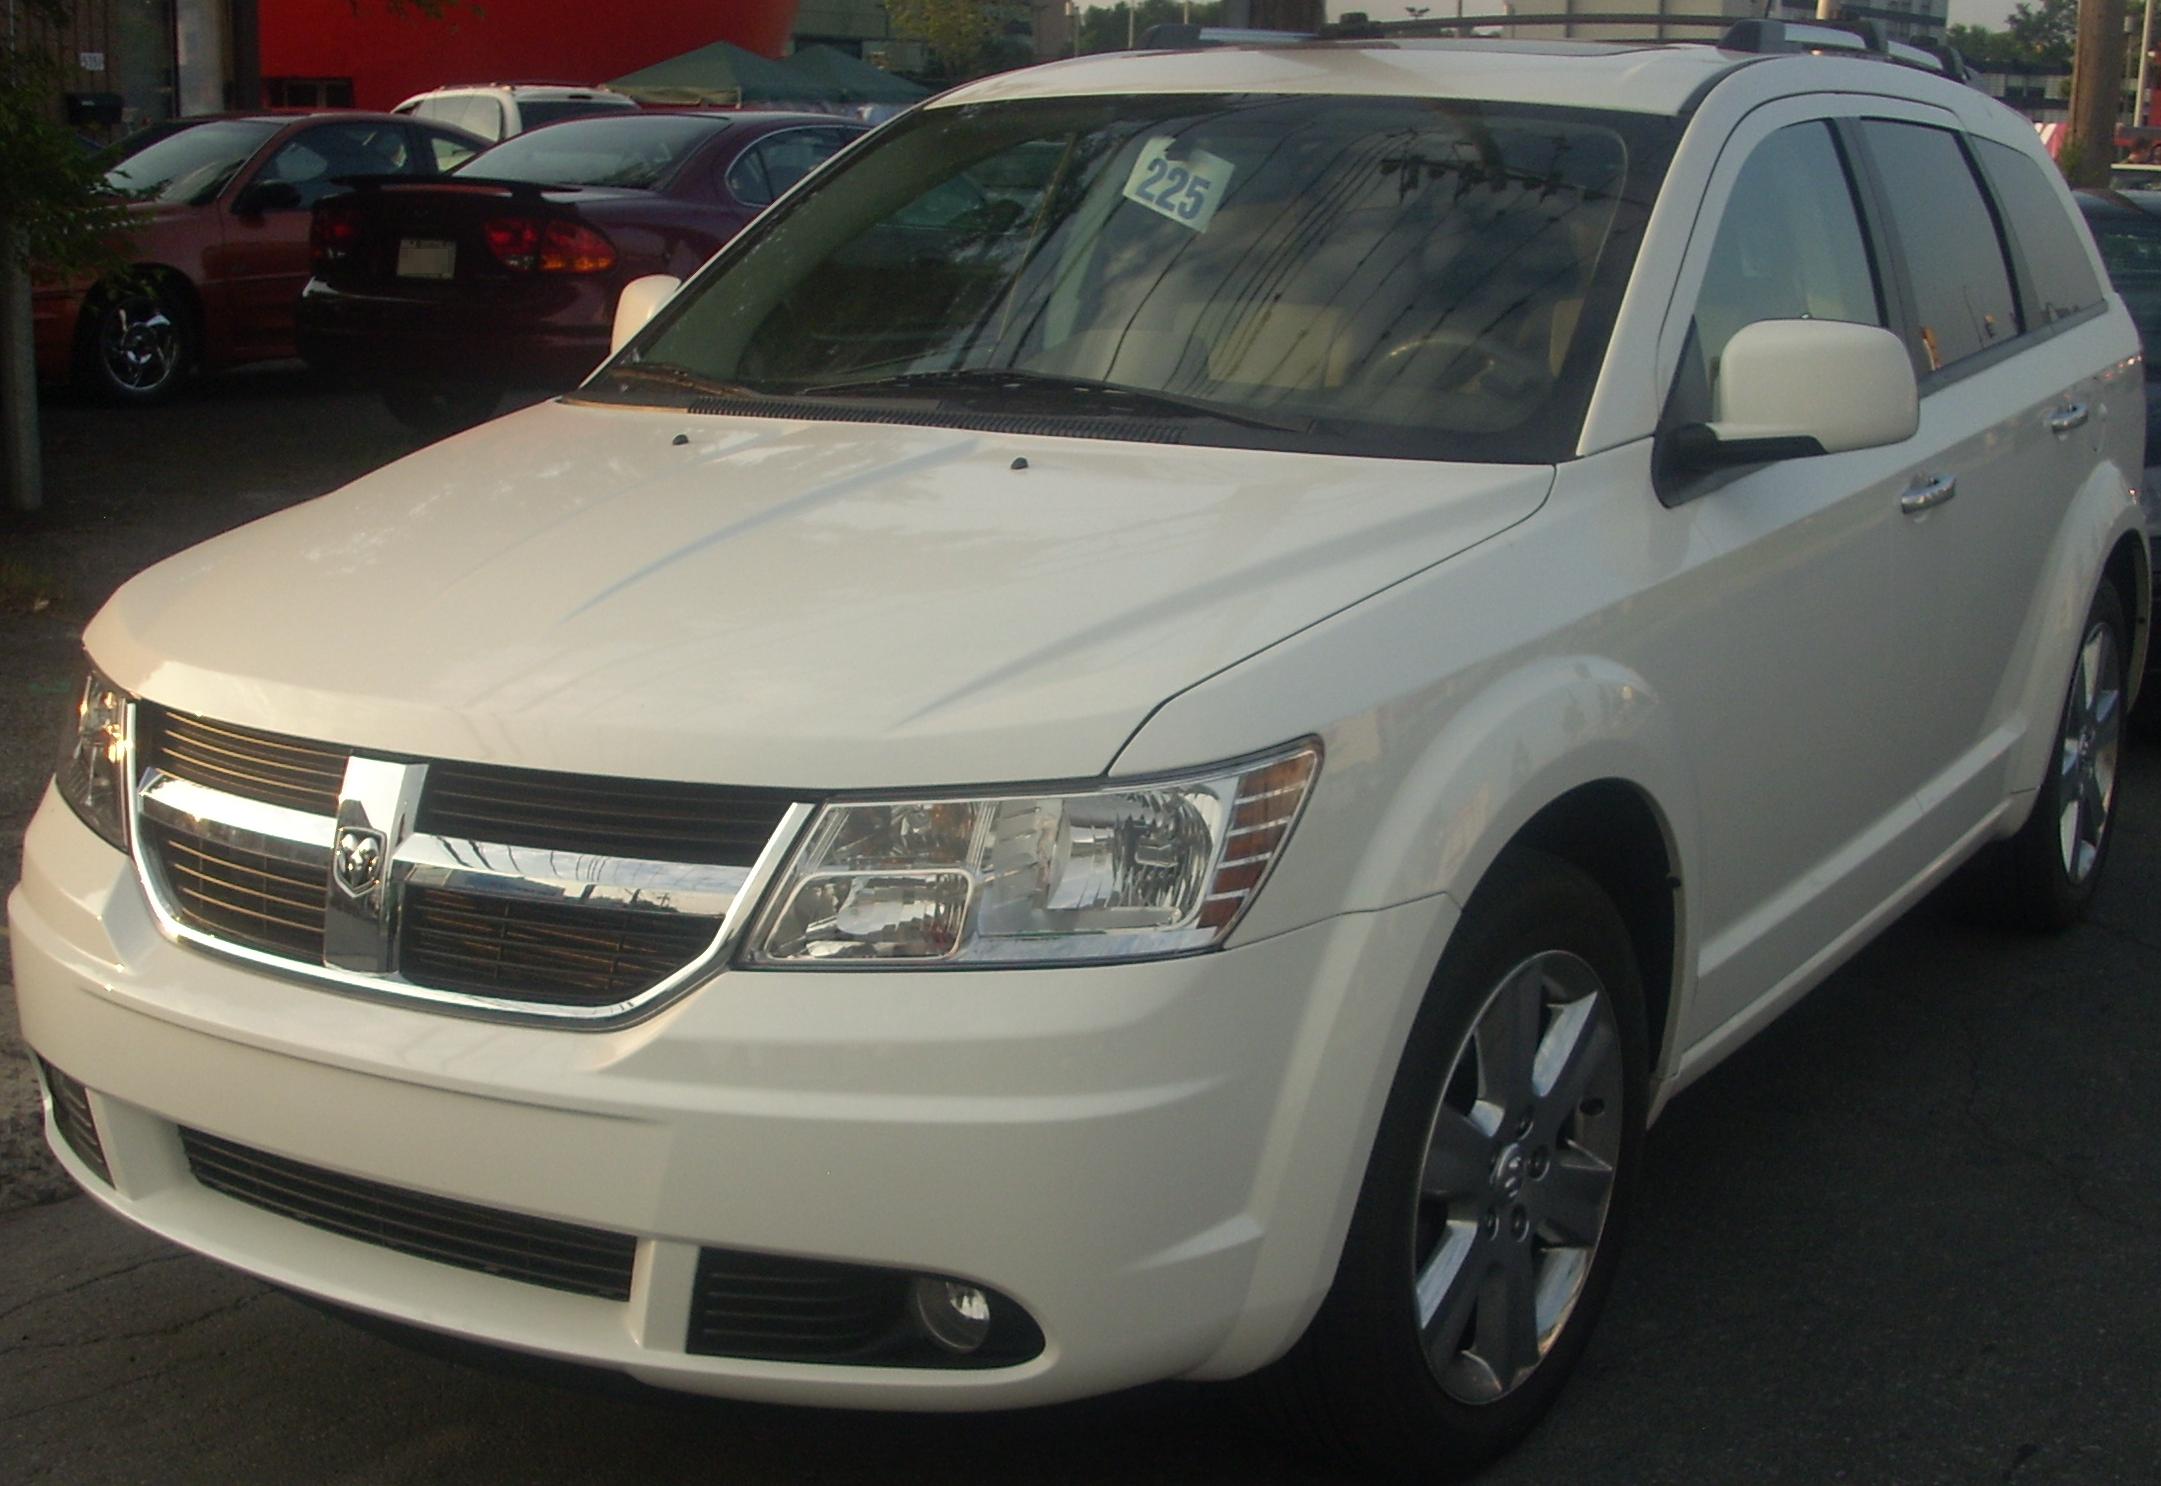 File:'10 Dodge Journey R-T -- Front.jpg - Wikimedia Commons